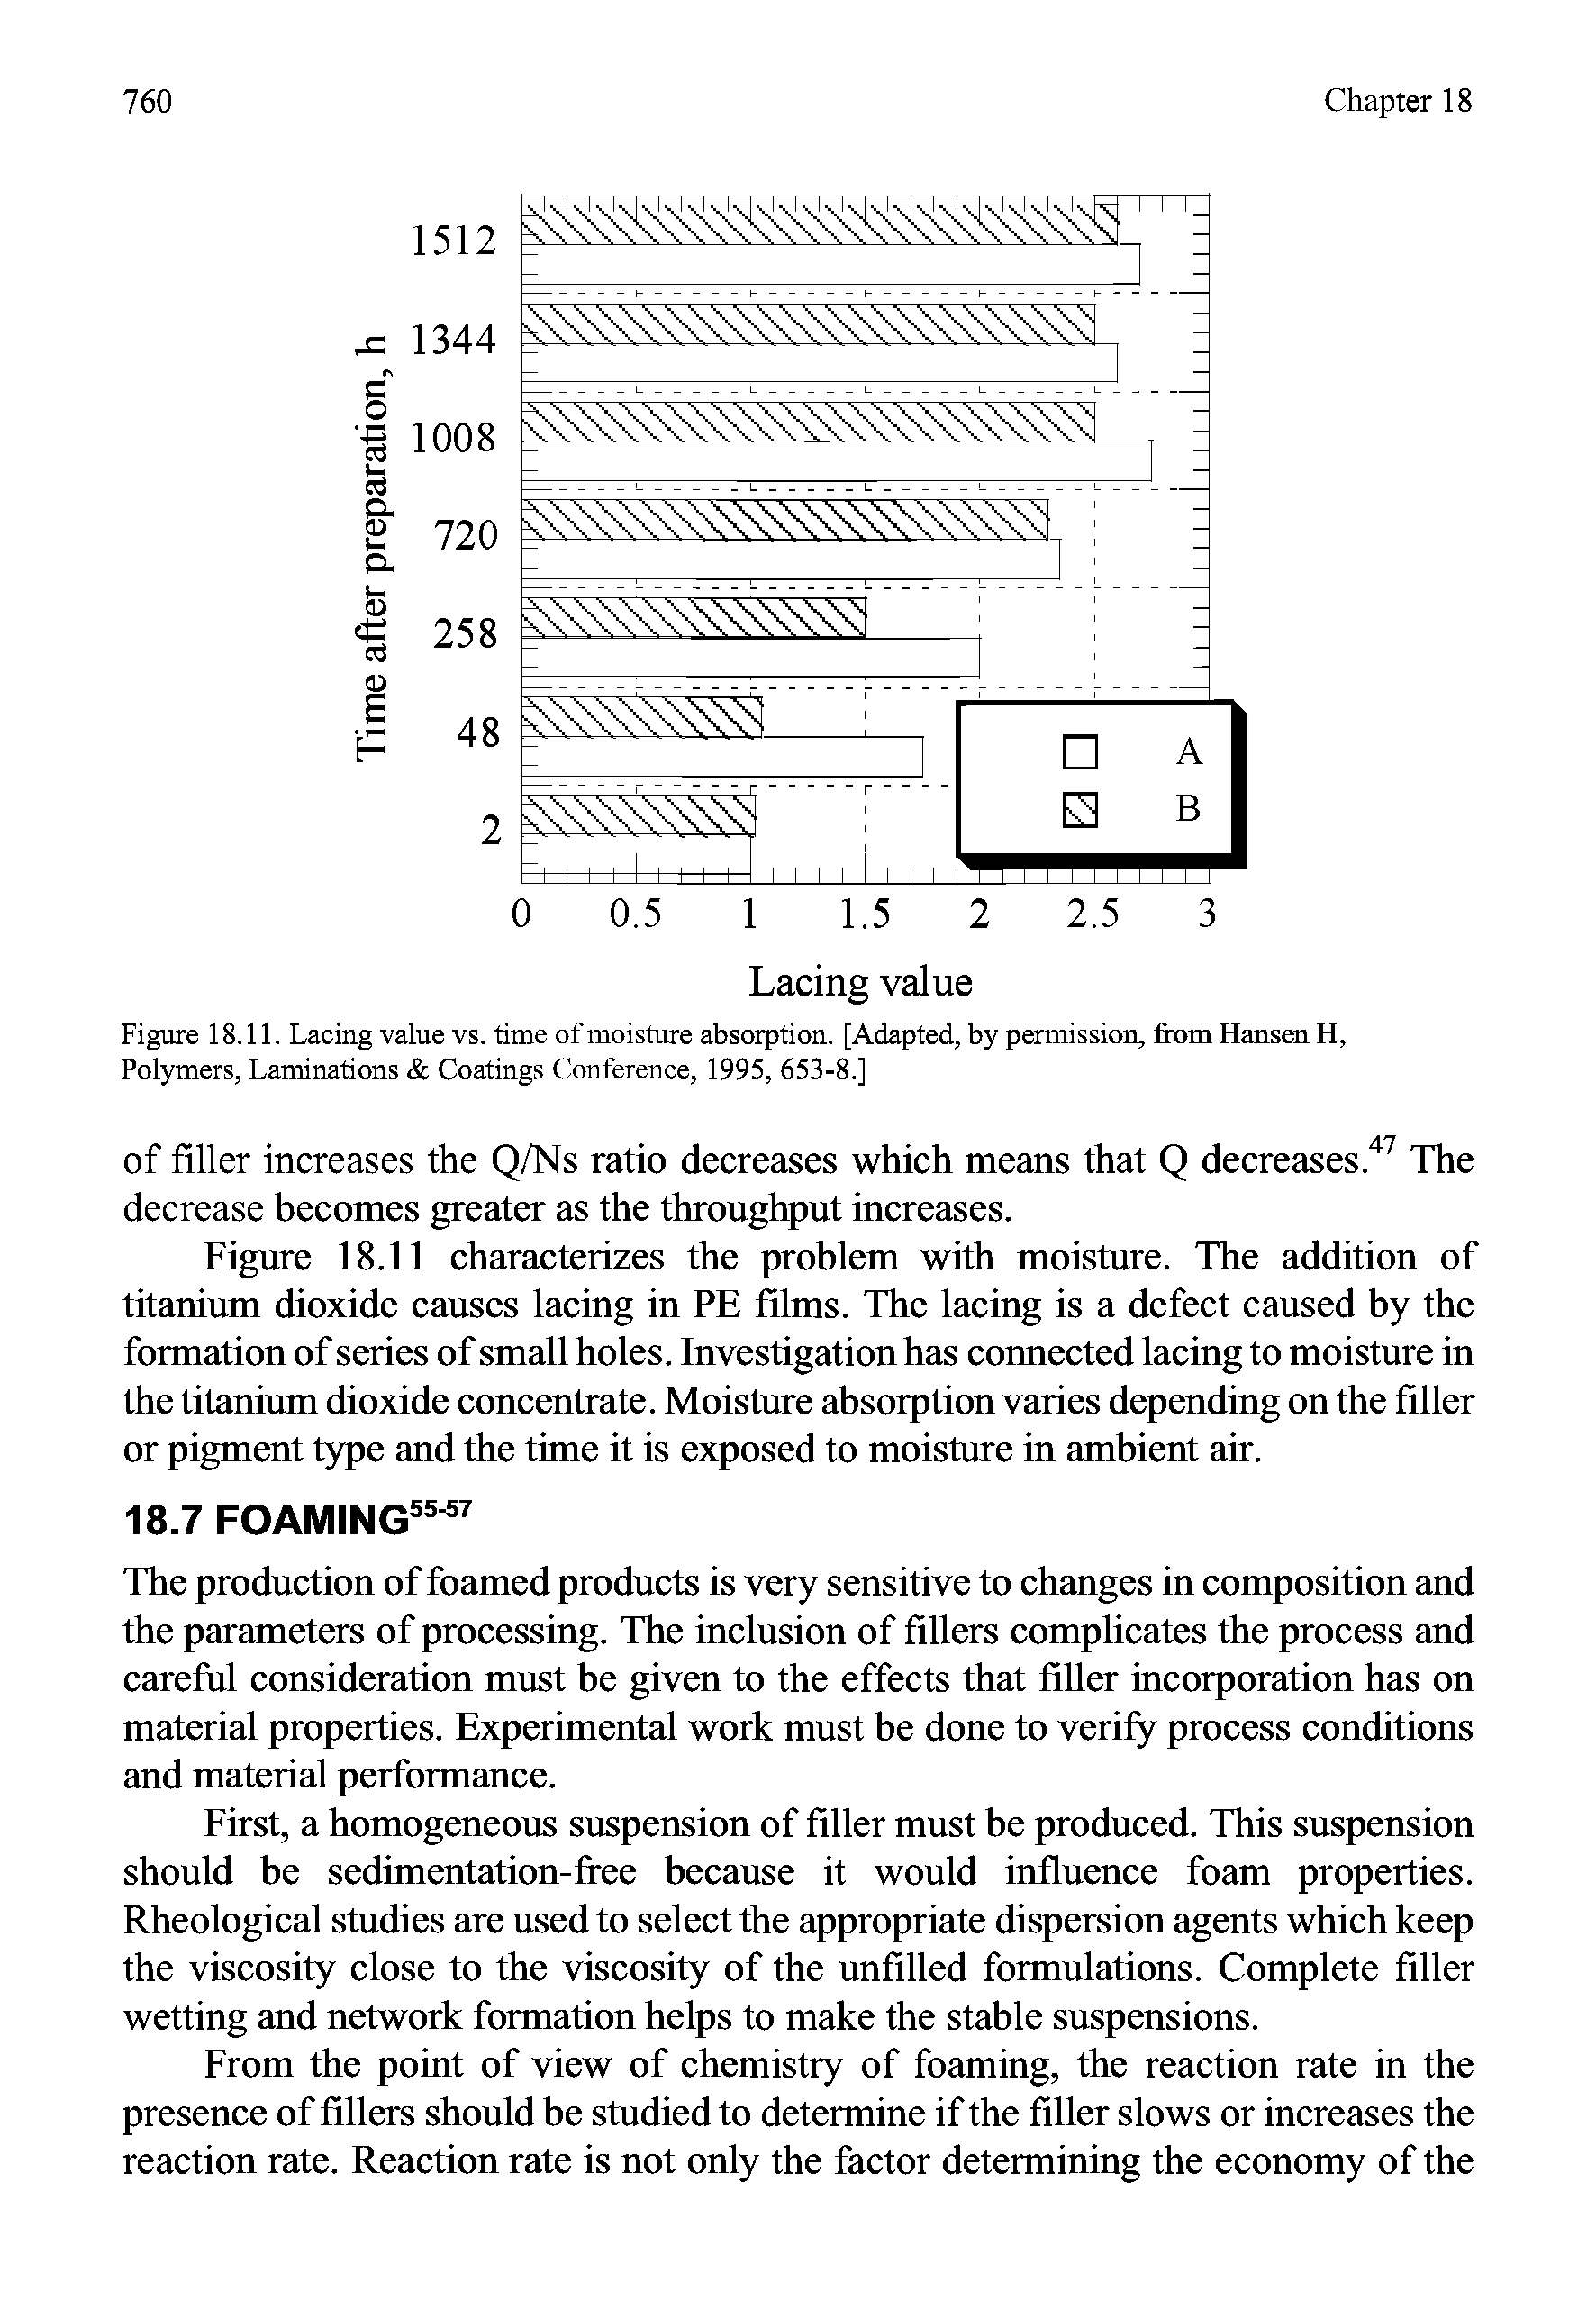 Figure 18.11. Lacing value vs. time of moisture absorption. [Adapted, by permission, from Hansen H, Polymers, Laminations Coatings Conference, 1995, 653-8.]...